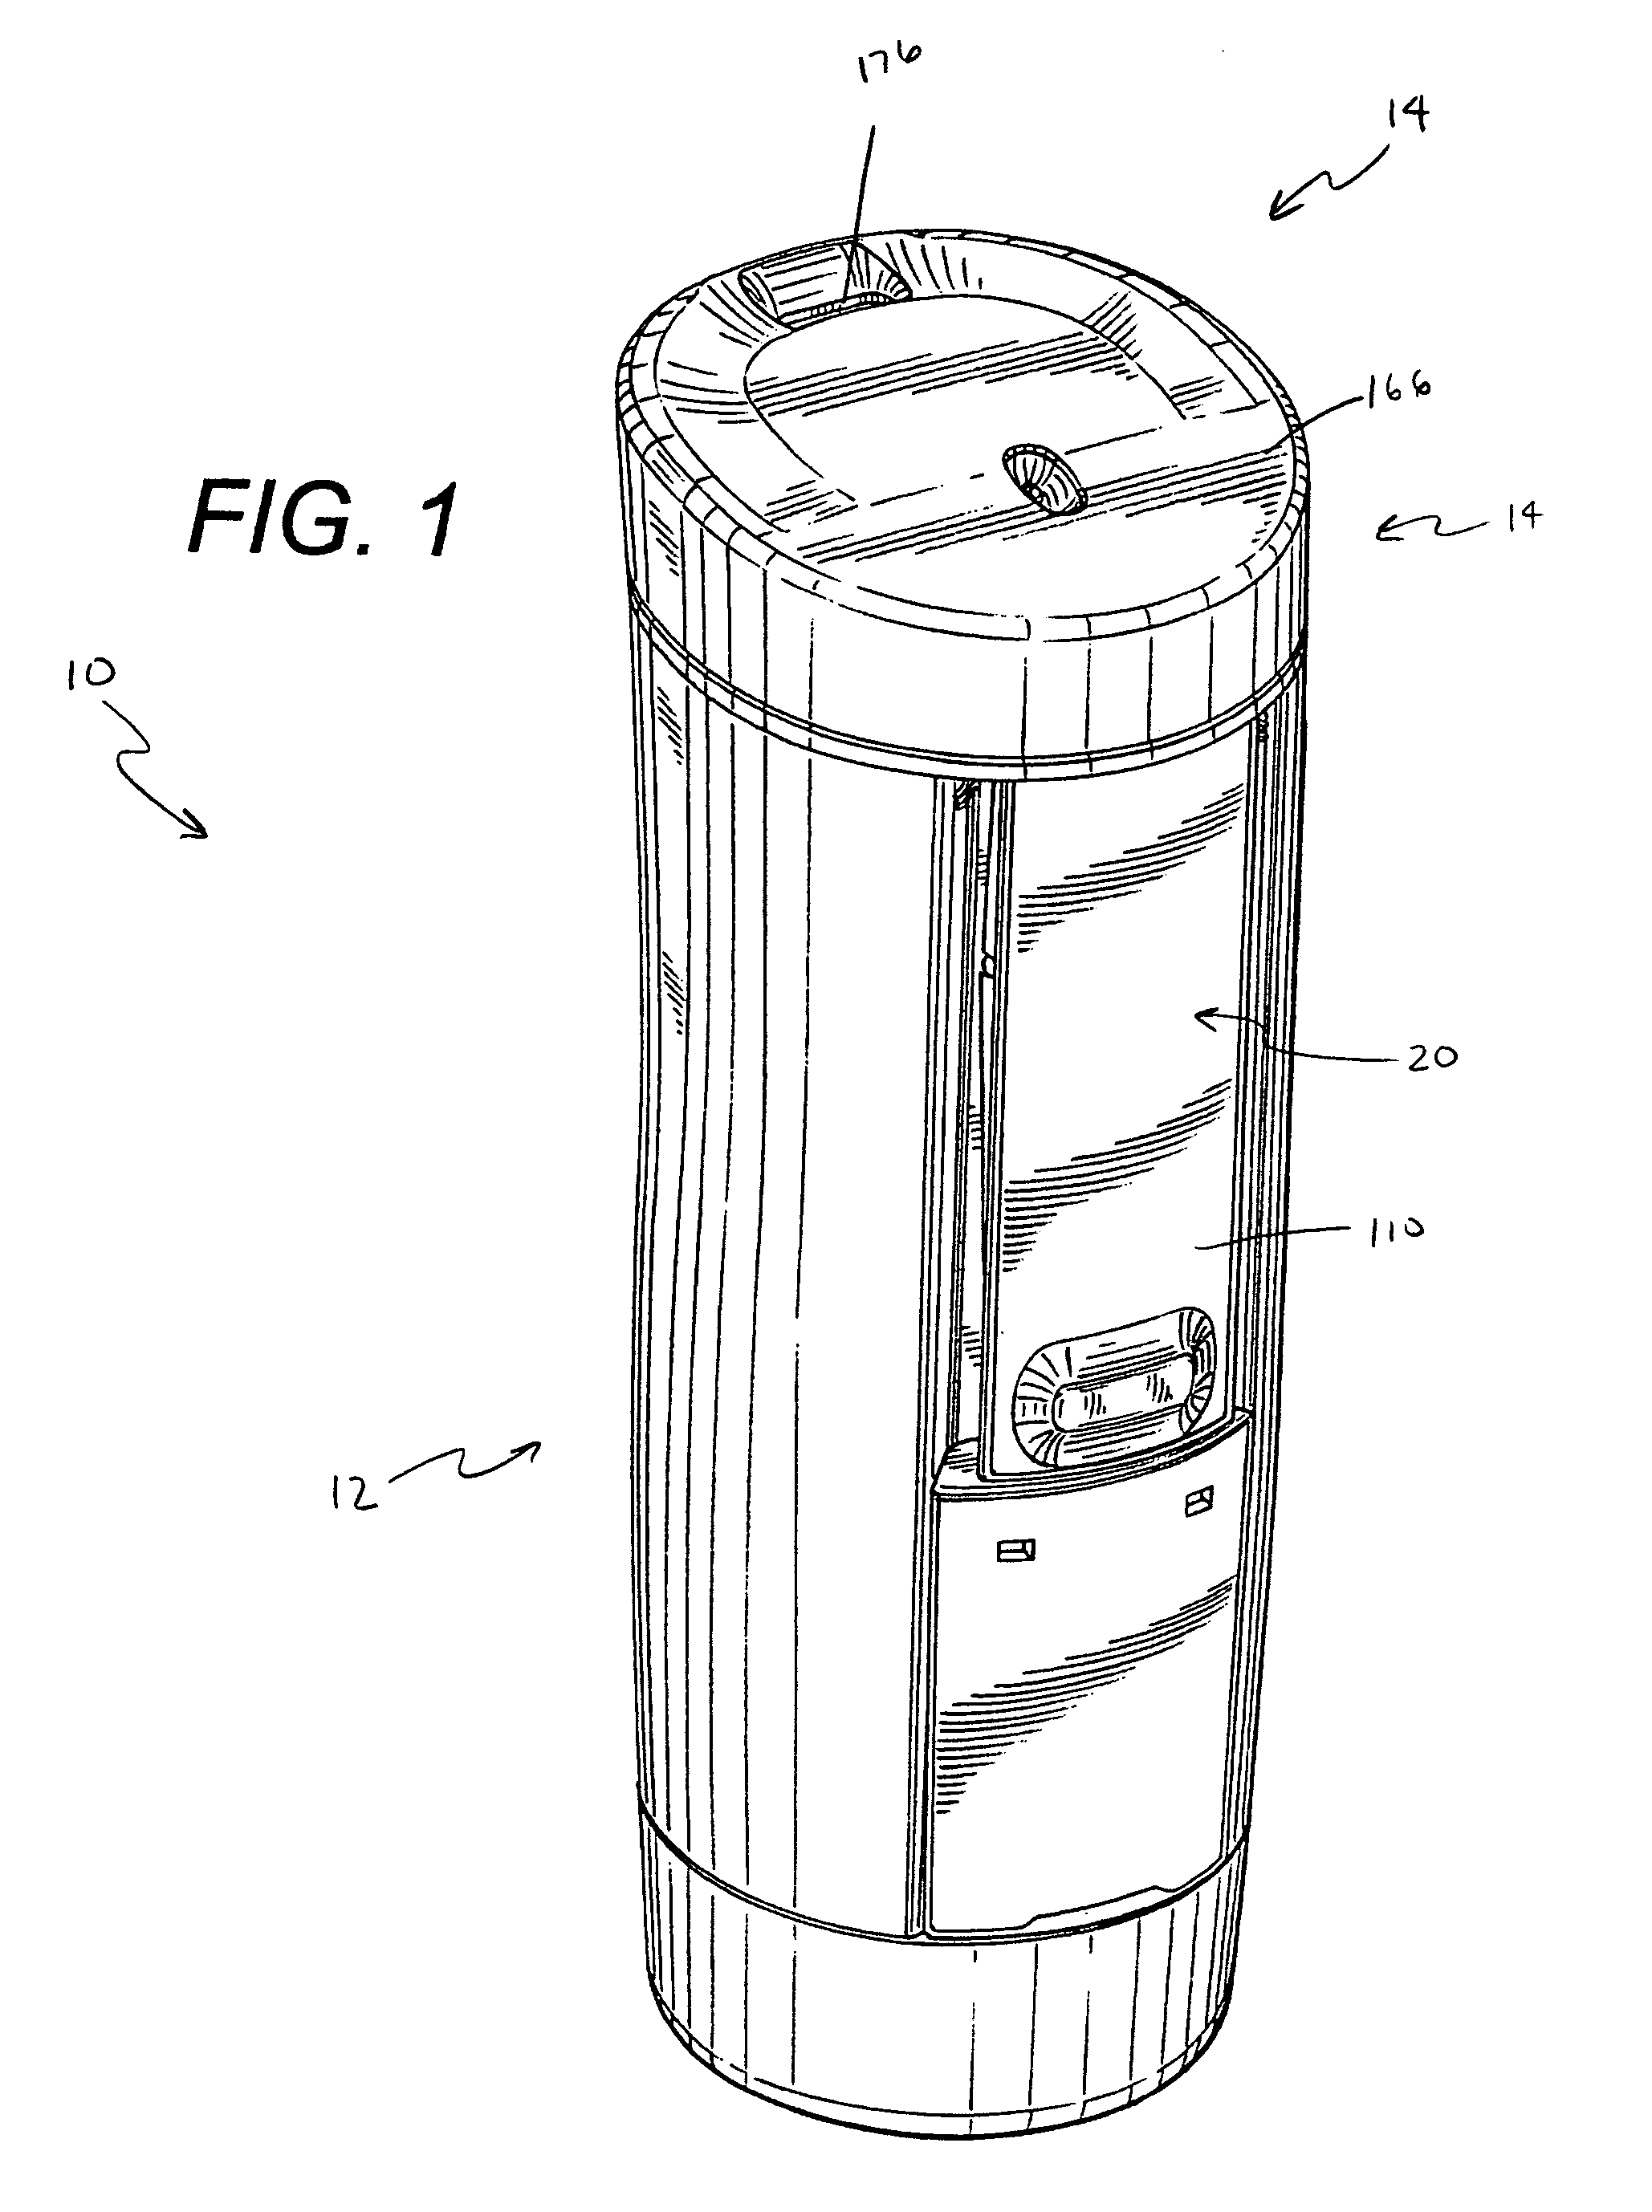 Travel container having drinking orifice and vent aperture seals